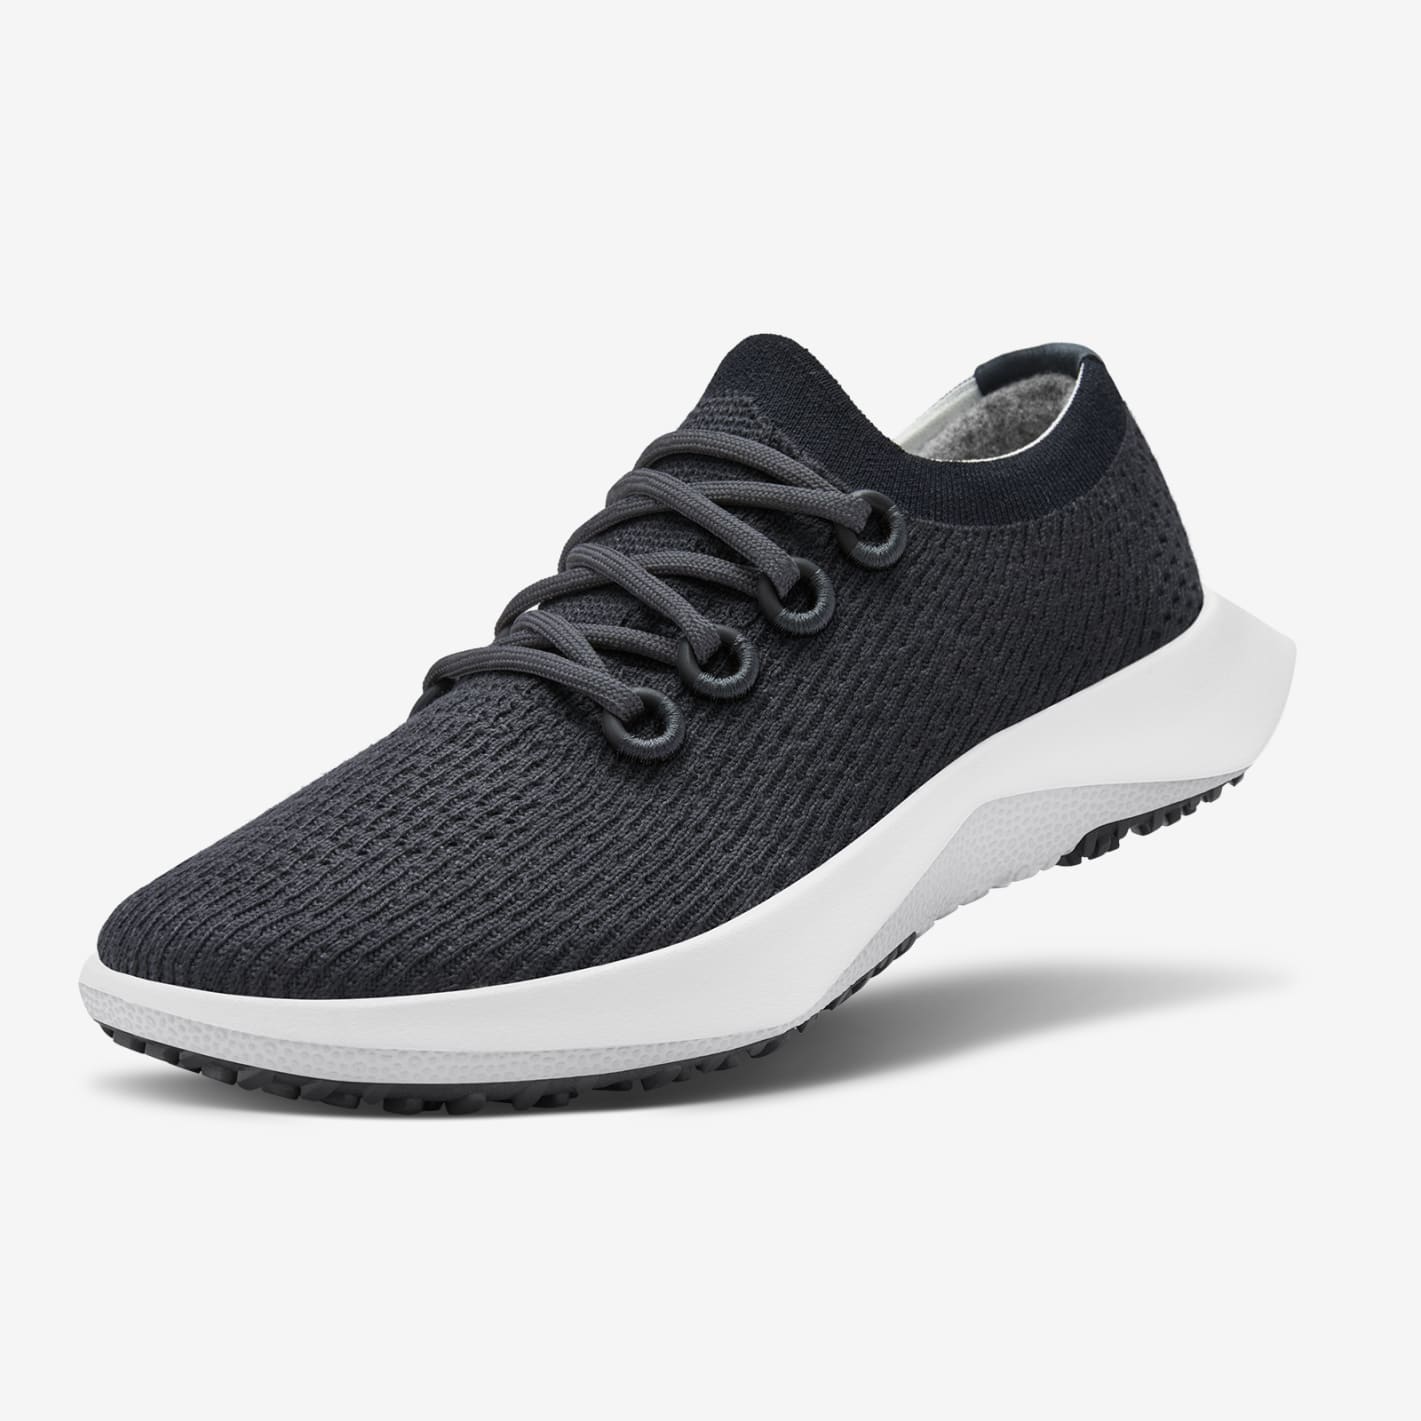 Allbirds men's wool runners made from recycled plastic